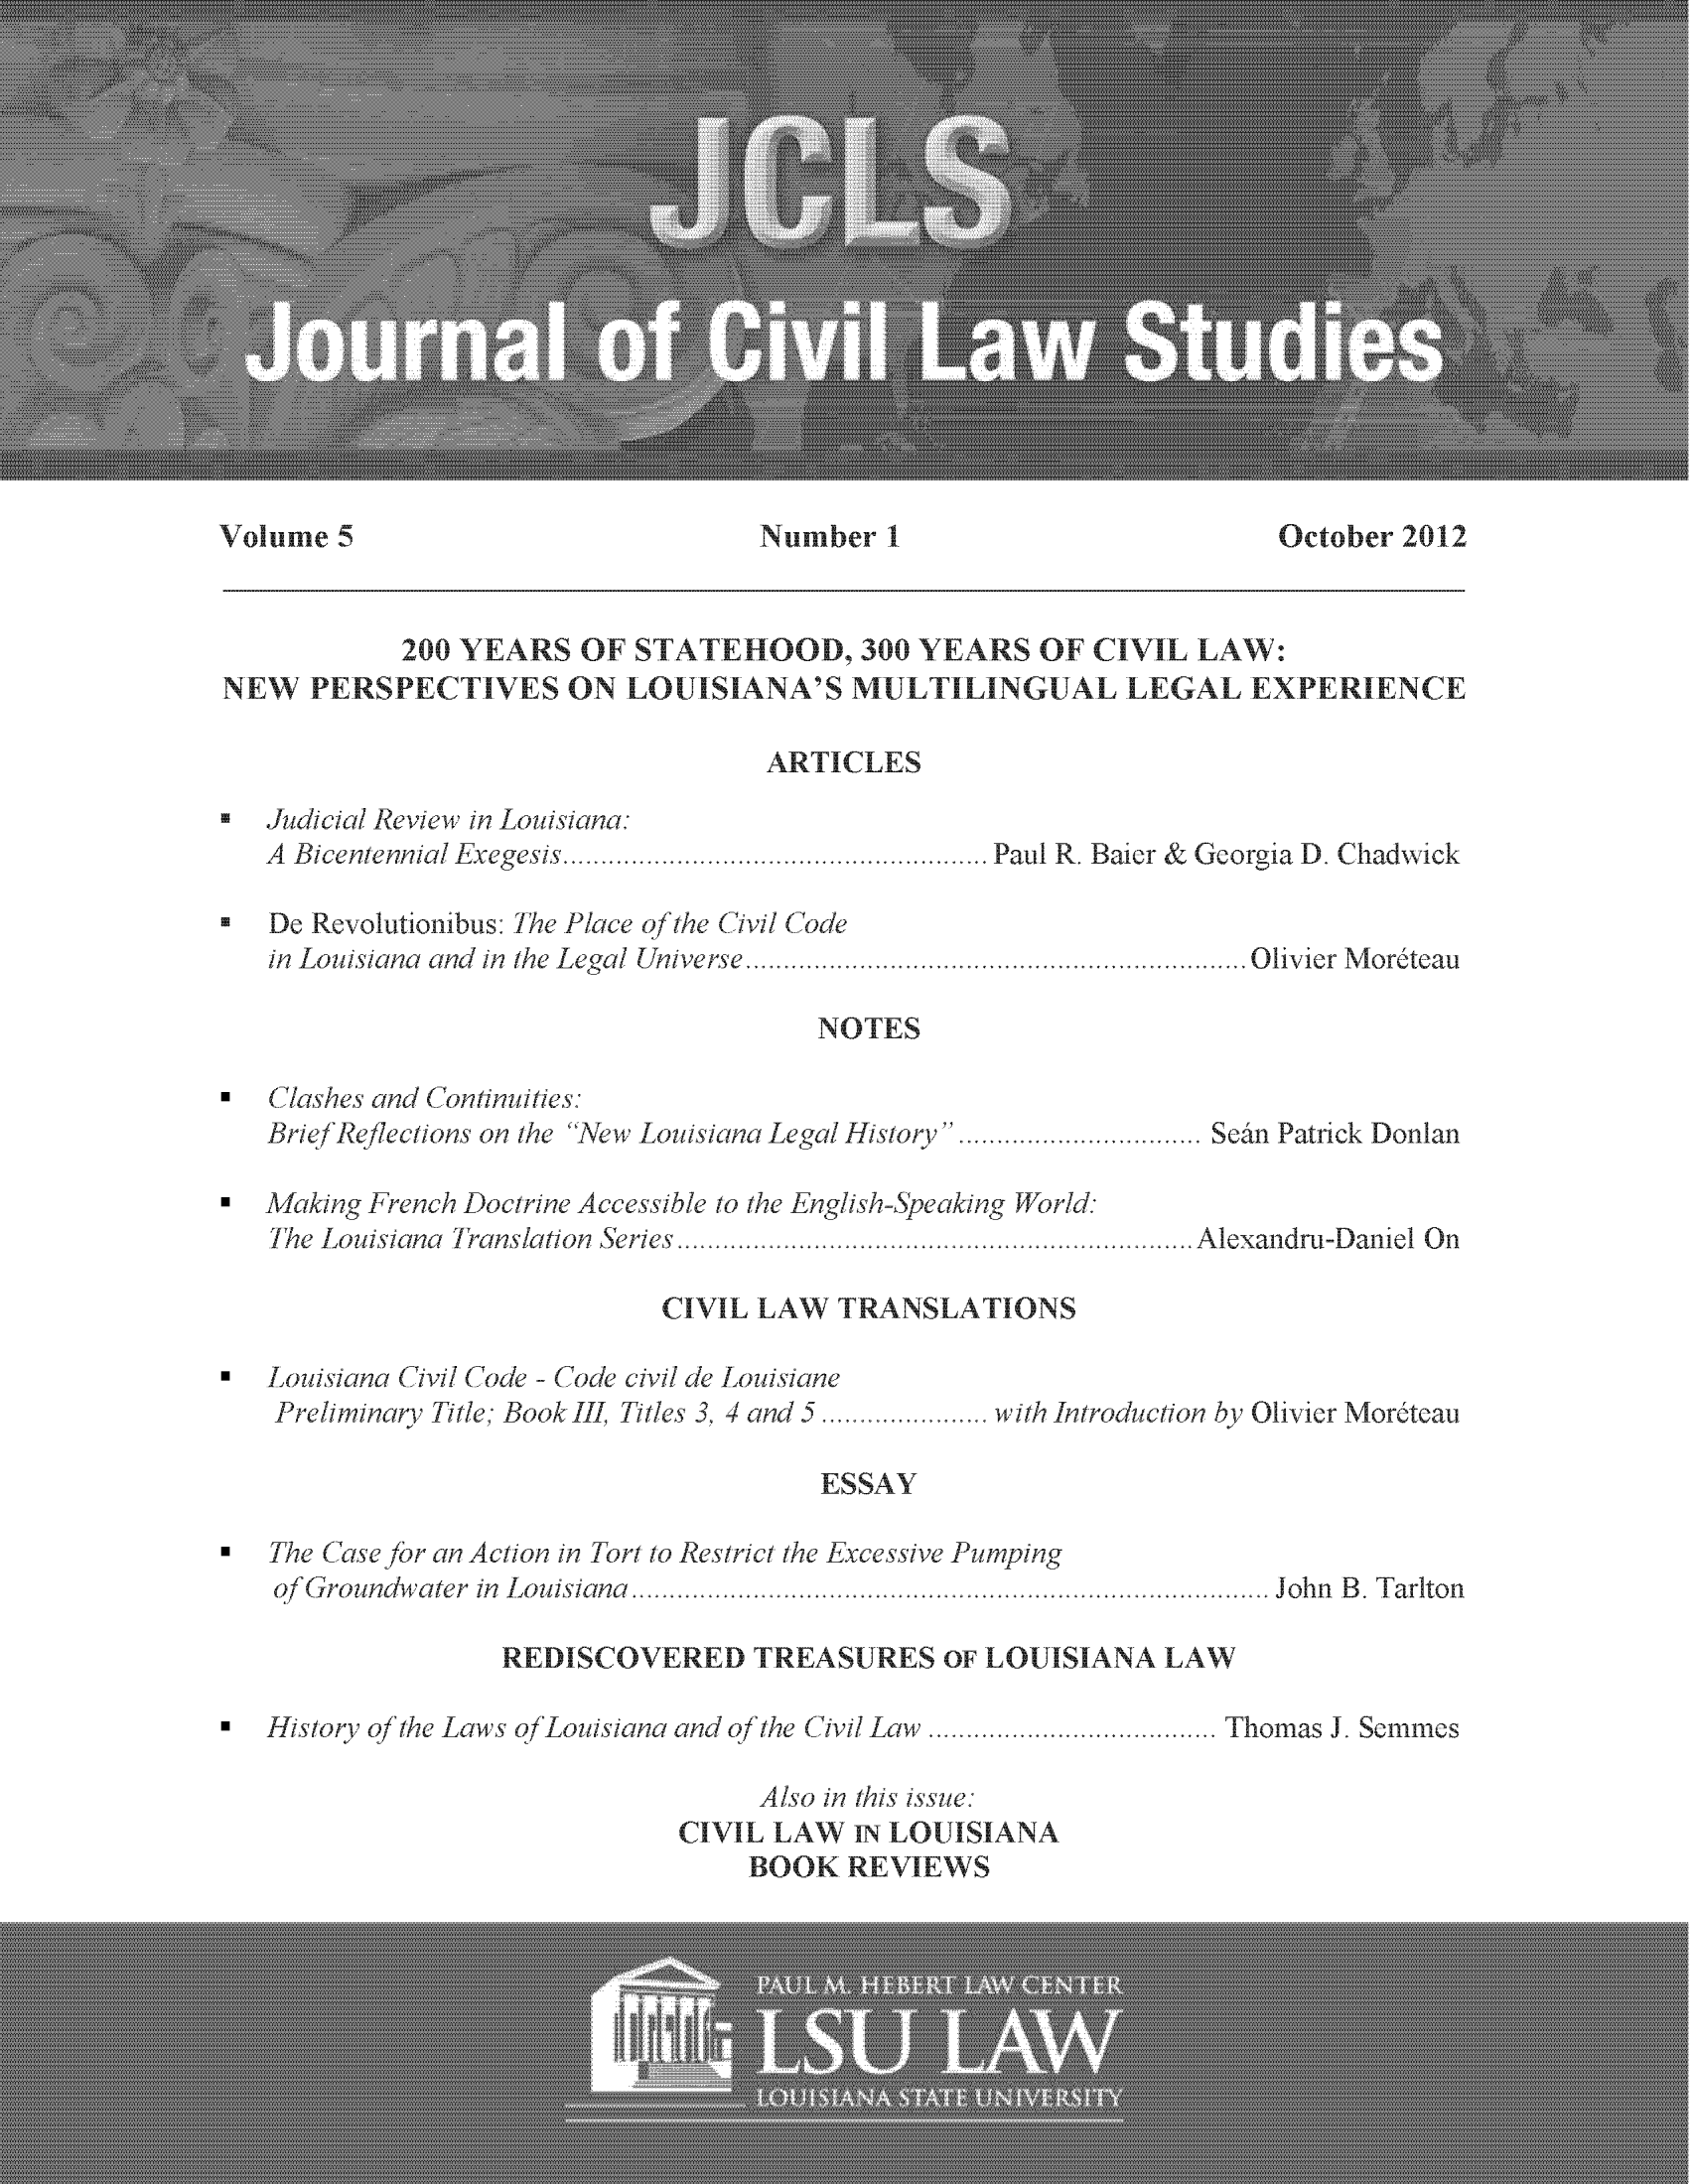 handle is hein.journals/jcilast5 and id is 1 raw text is: October 2012

200 YEARS OF STATEHOOD, 300 YEARS OF CIVIL LAW:
NEW   PERSPECTIVES ON LOUISIANA'S MULTILINGUAL LEGAL EXPERIENCE
ARTICLES
* Judicial Review in Louisiana:
A Bicentennial Exegesis.... Paul R. Baier & Georgia D. Chadwick
* De Revolutionibus: lhe Place of the Civil Code
in Louisiana and in the Legal Universe. ........................ .....Olivier Moreteau

NOTES

*  Clashes and Continuities:
Brief Reflections on the New Louisiana Legal Histoy.e..................San Patrick Donlan

*Makin~g French Doctrine Accessible to the English-Speakin~g World:
The Louisiana Translation Series...
CIVIL LAW TRANSLATIONS

Alexandru-Daniel On

*   Louisiana ('ivil Code - Code civil de Louisiane
Preliminary Title: Book III. Titles 3, 4 and 5....

with Introduction by Olivier Moreteau

ESSAY

*  The Case for an Action in Tort to Restrict the Excessive Pumping
of Groundvater in Louisiana.

John B. Tarlton

REDISCOVERED TREASURES OF LOUISIANA LAW

* Histoly oJ the Laws of Louisiana and of the Civil Law.
Also in this issue:
CIVIL LAW IN LOUISIANA
BOOK REVIEWS

Thomas J. Semmes

volume 5

Number 1I


